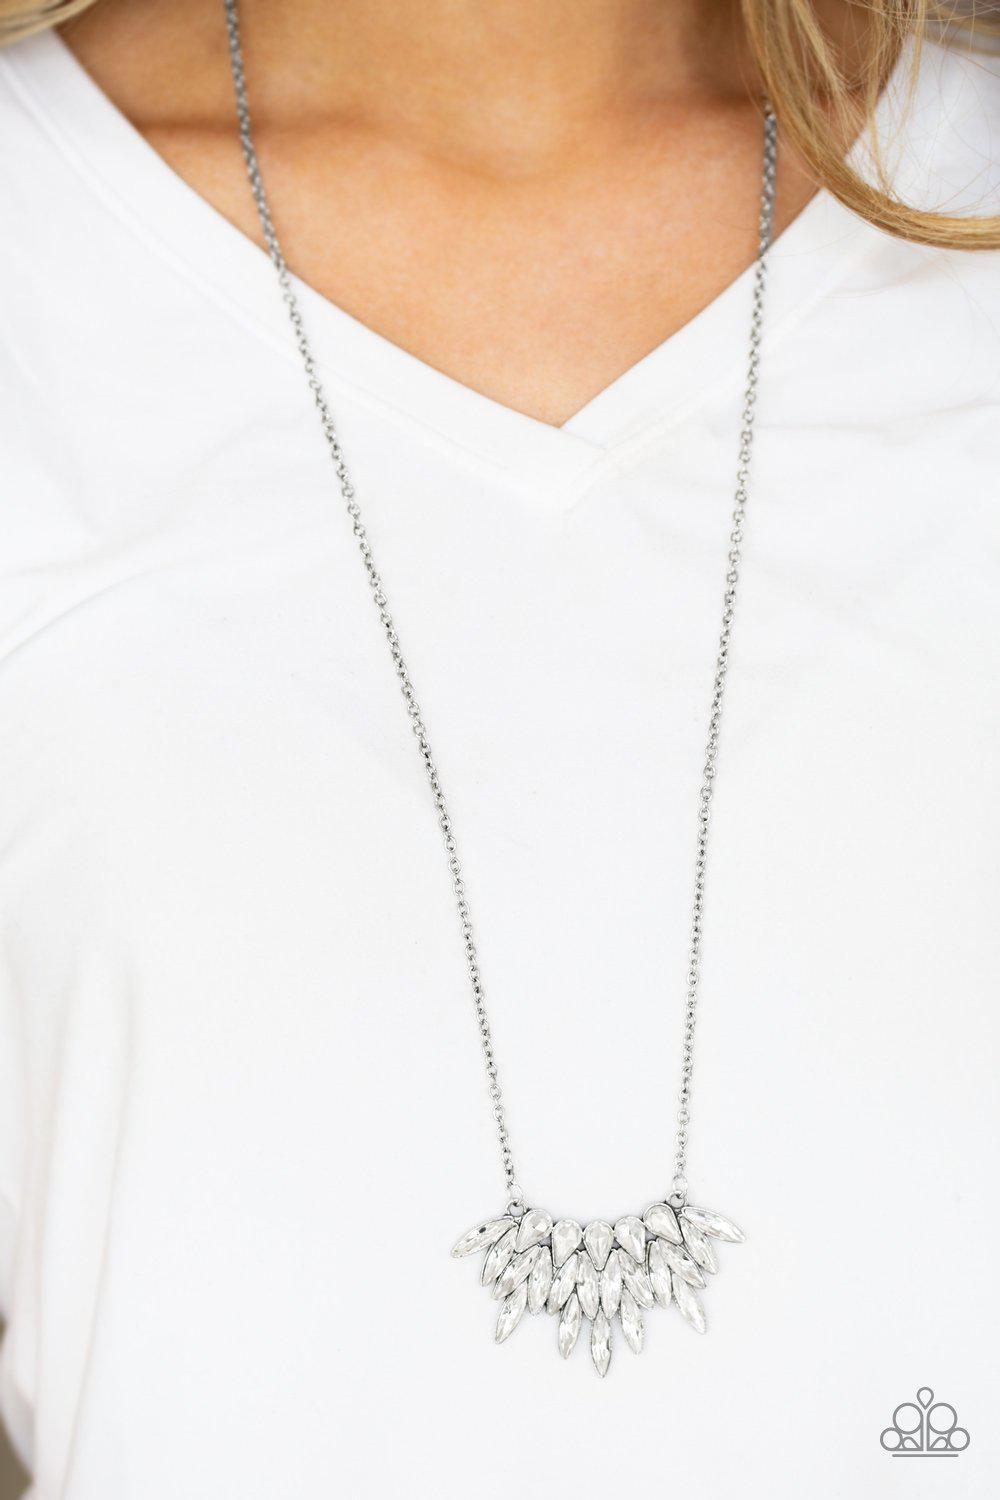 Crowning Moment White Rhinestone Necklace - Paparazzi Accessories-CarasShop.com - $5 Jewelry by Cara Jewels